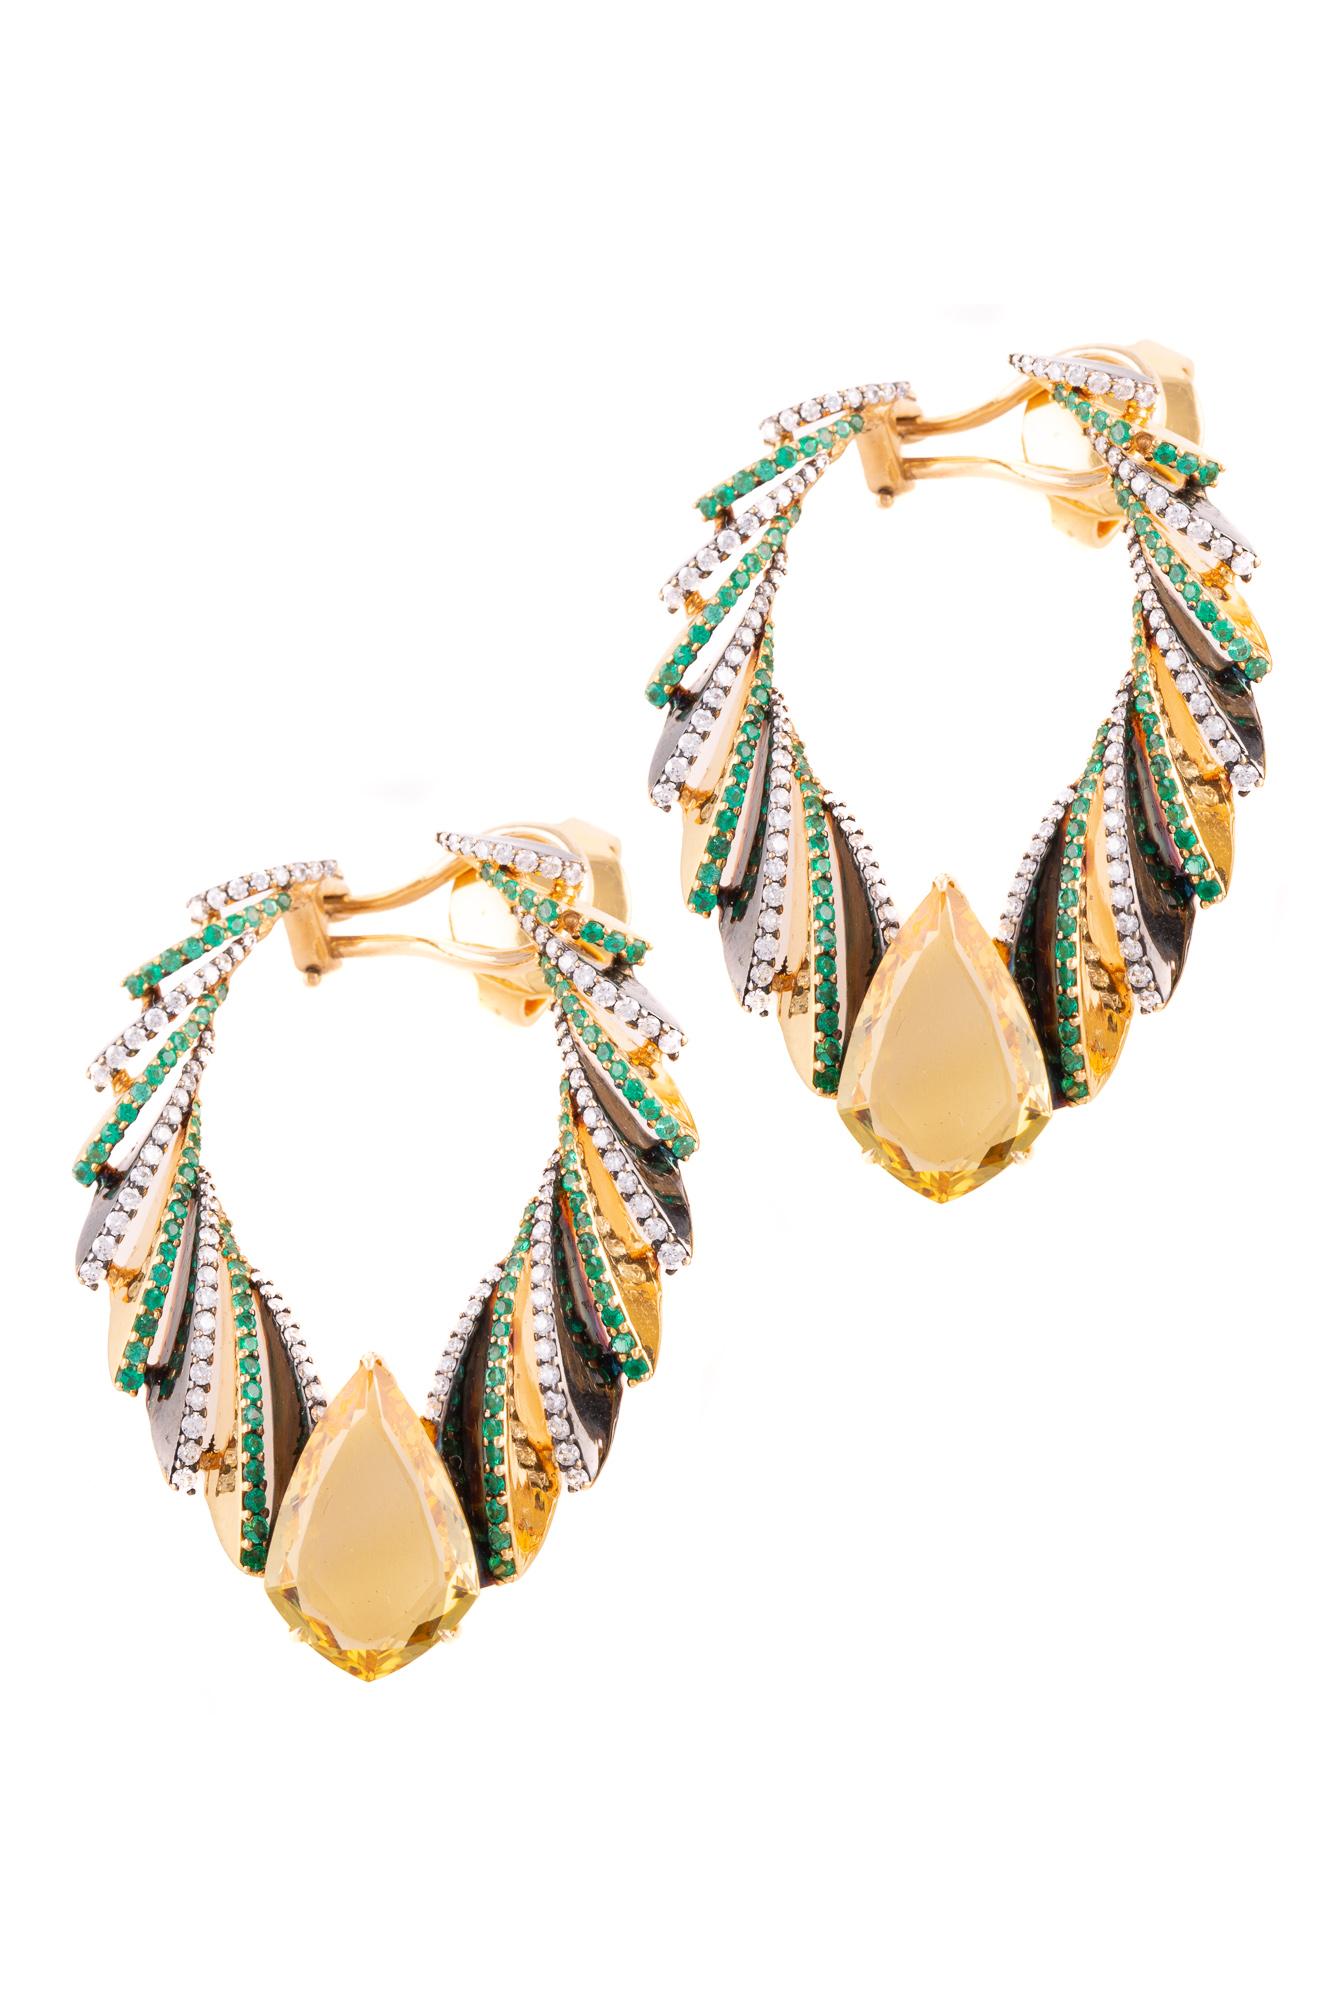 Two spectatular shield-cut pieces of yellow beryl take up center stage in these earrings in 18k yellow gold, flanked by brilliant-cut white diamonds and emeralds.

A dramatic black finish is applied in alternating sections, producing an effect